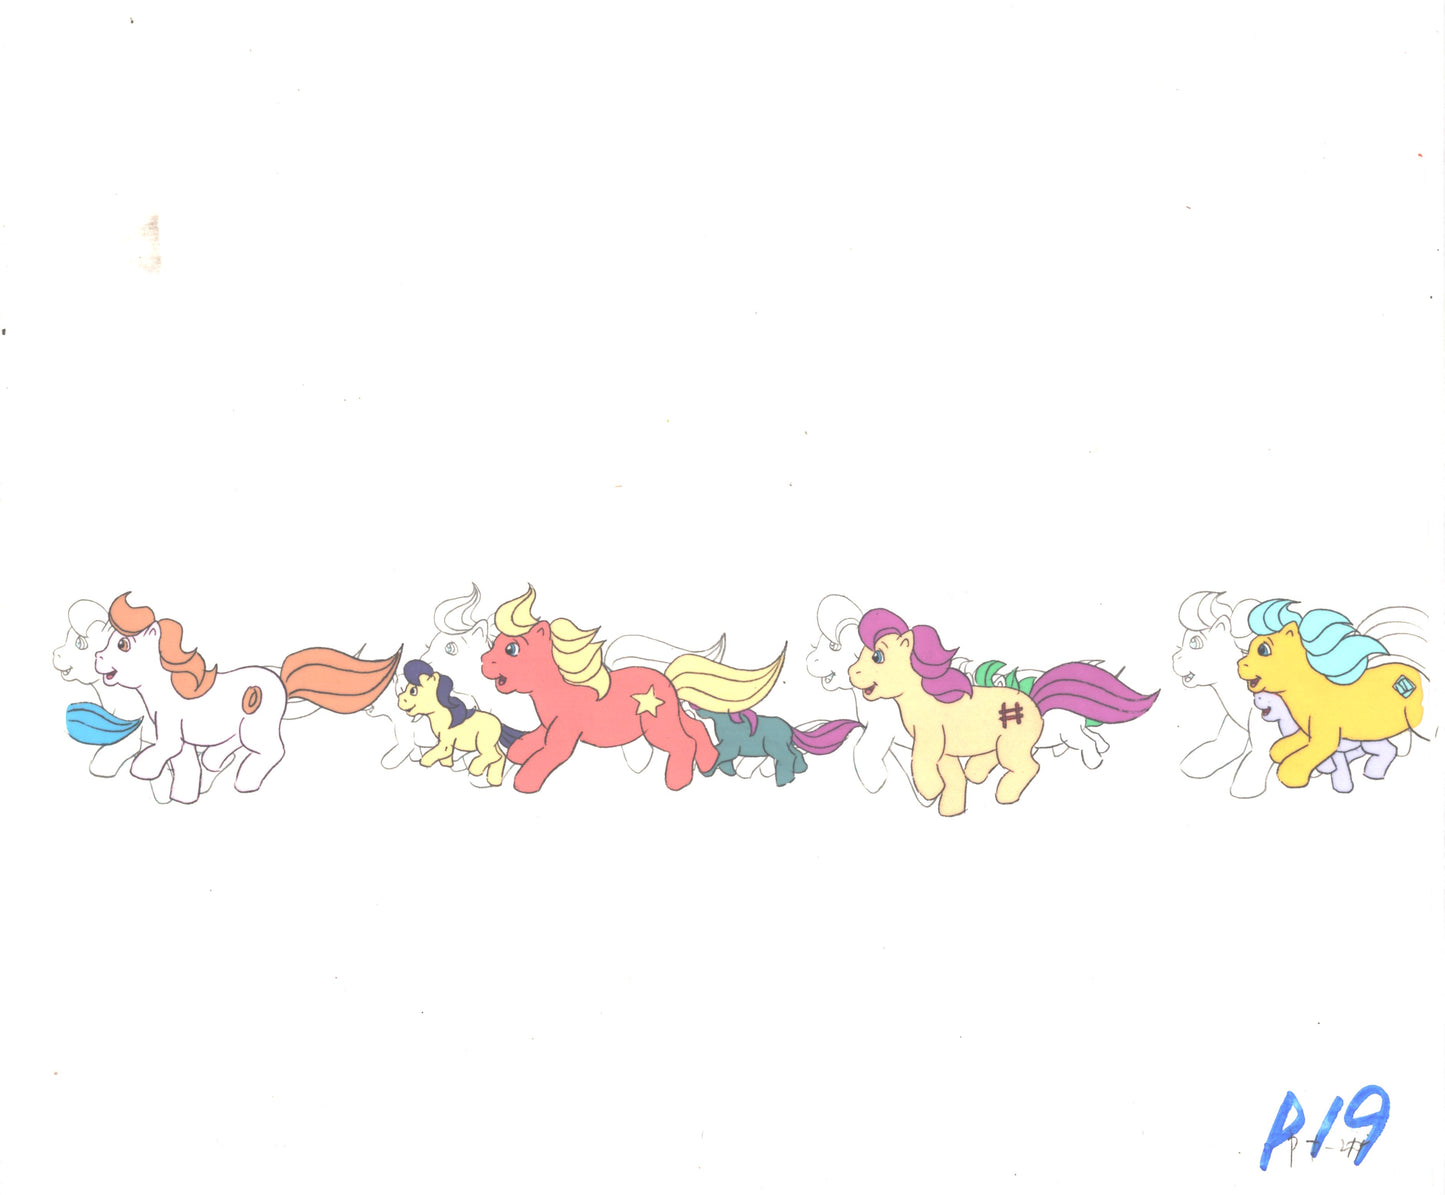 My Little Pony Original Production Animation Cel Hasbro Sunbow 1980s or 90s Used to Make the Cartoon G-P19A